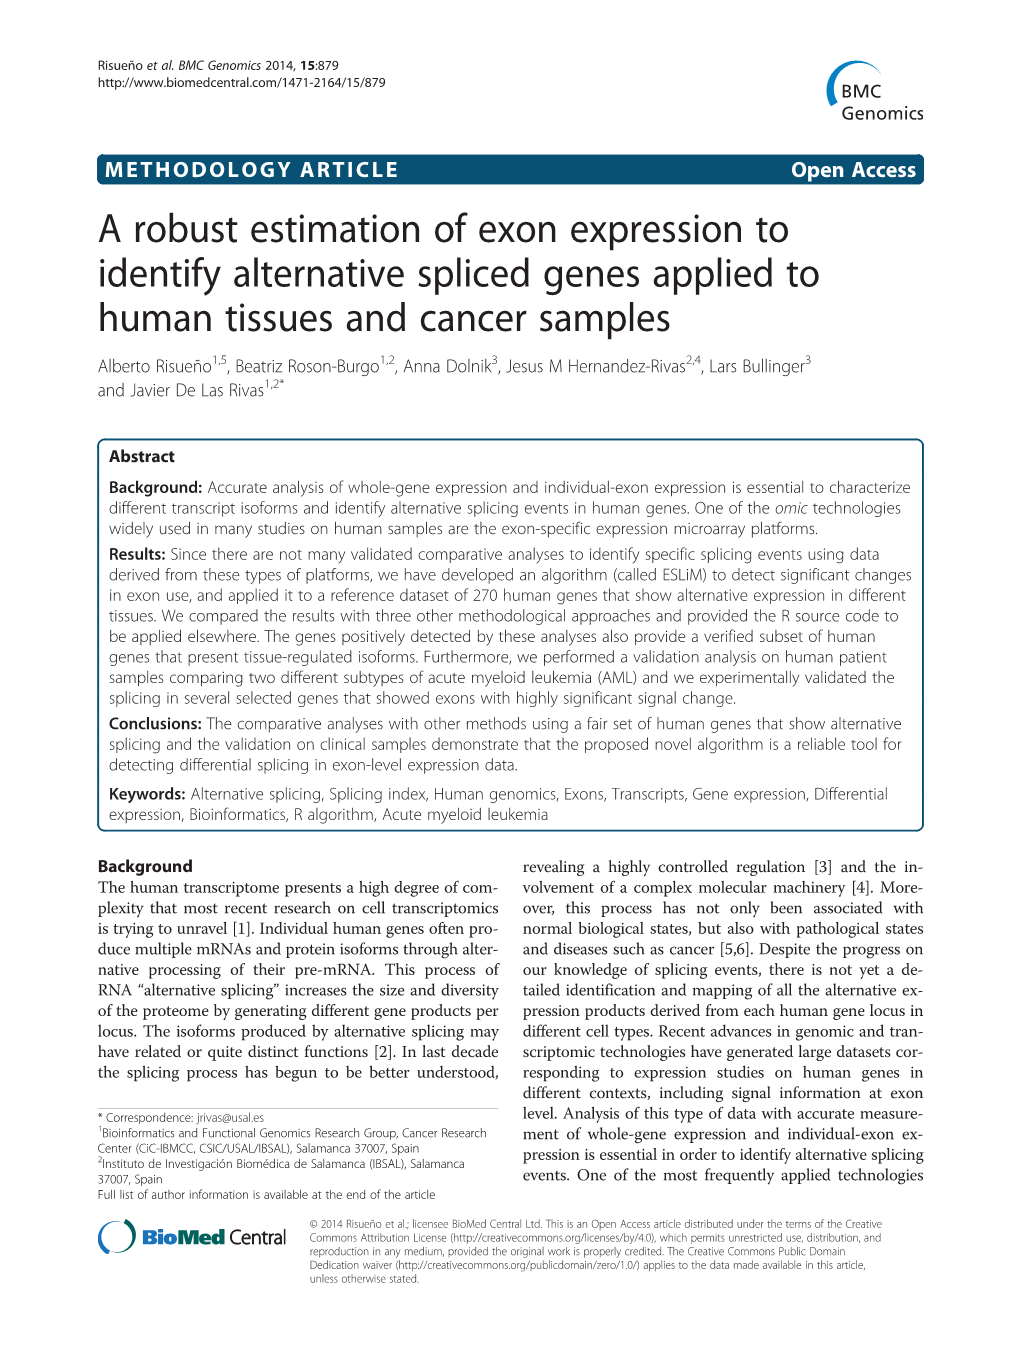 A Robust Estimation of Exon Expression To